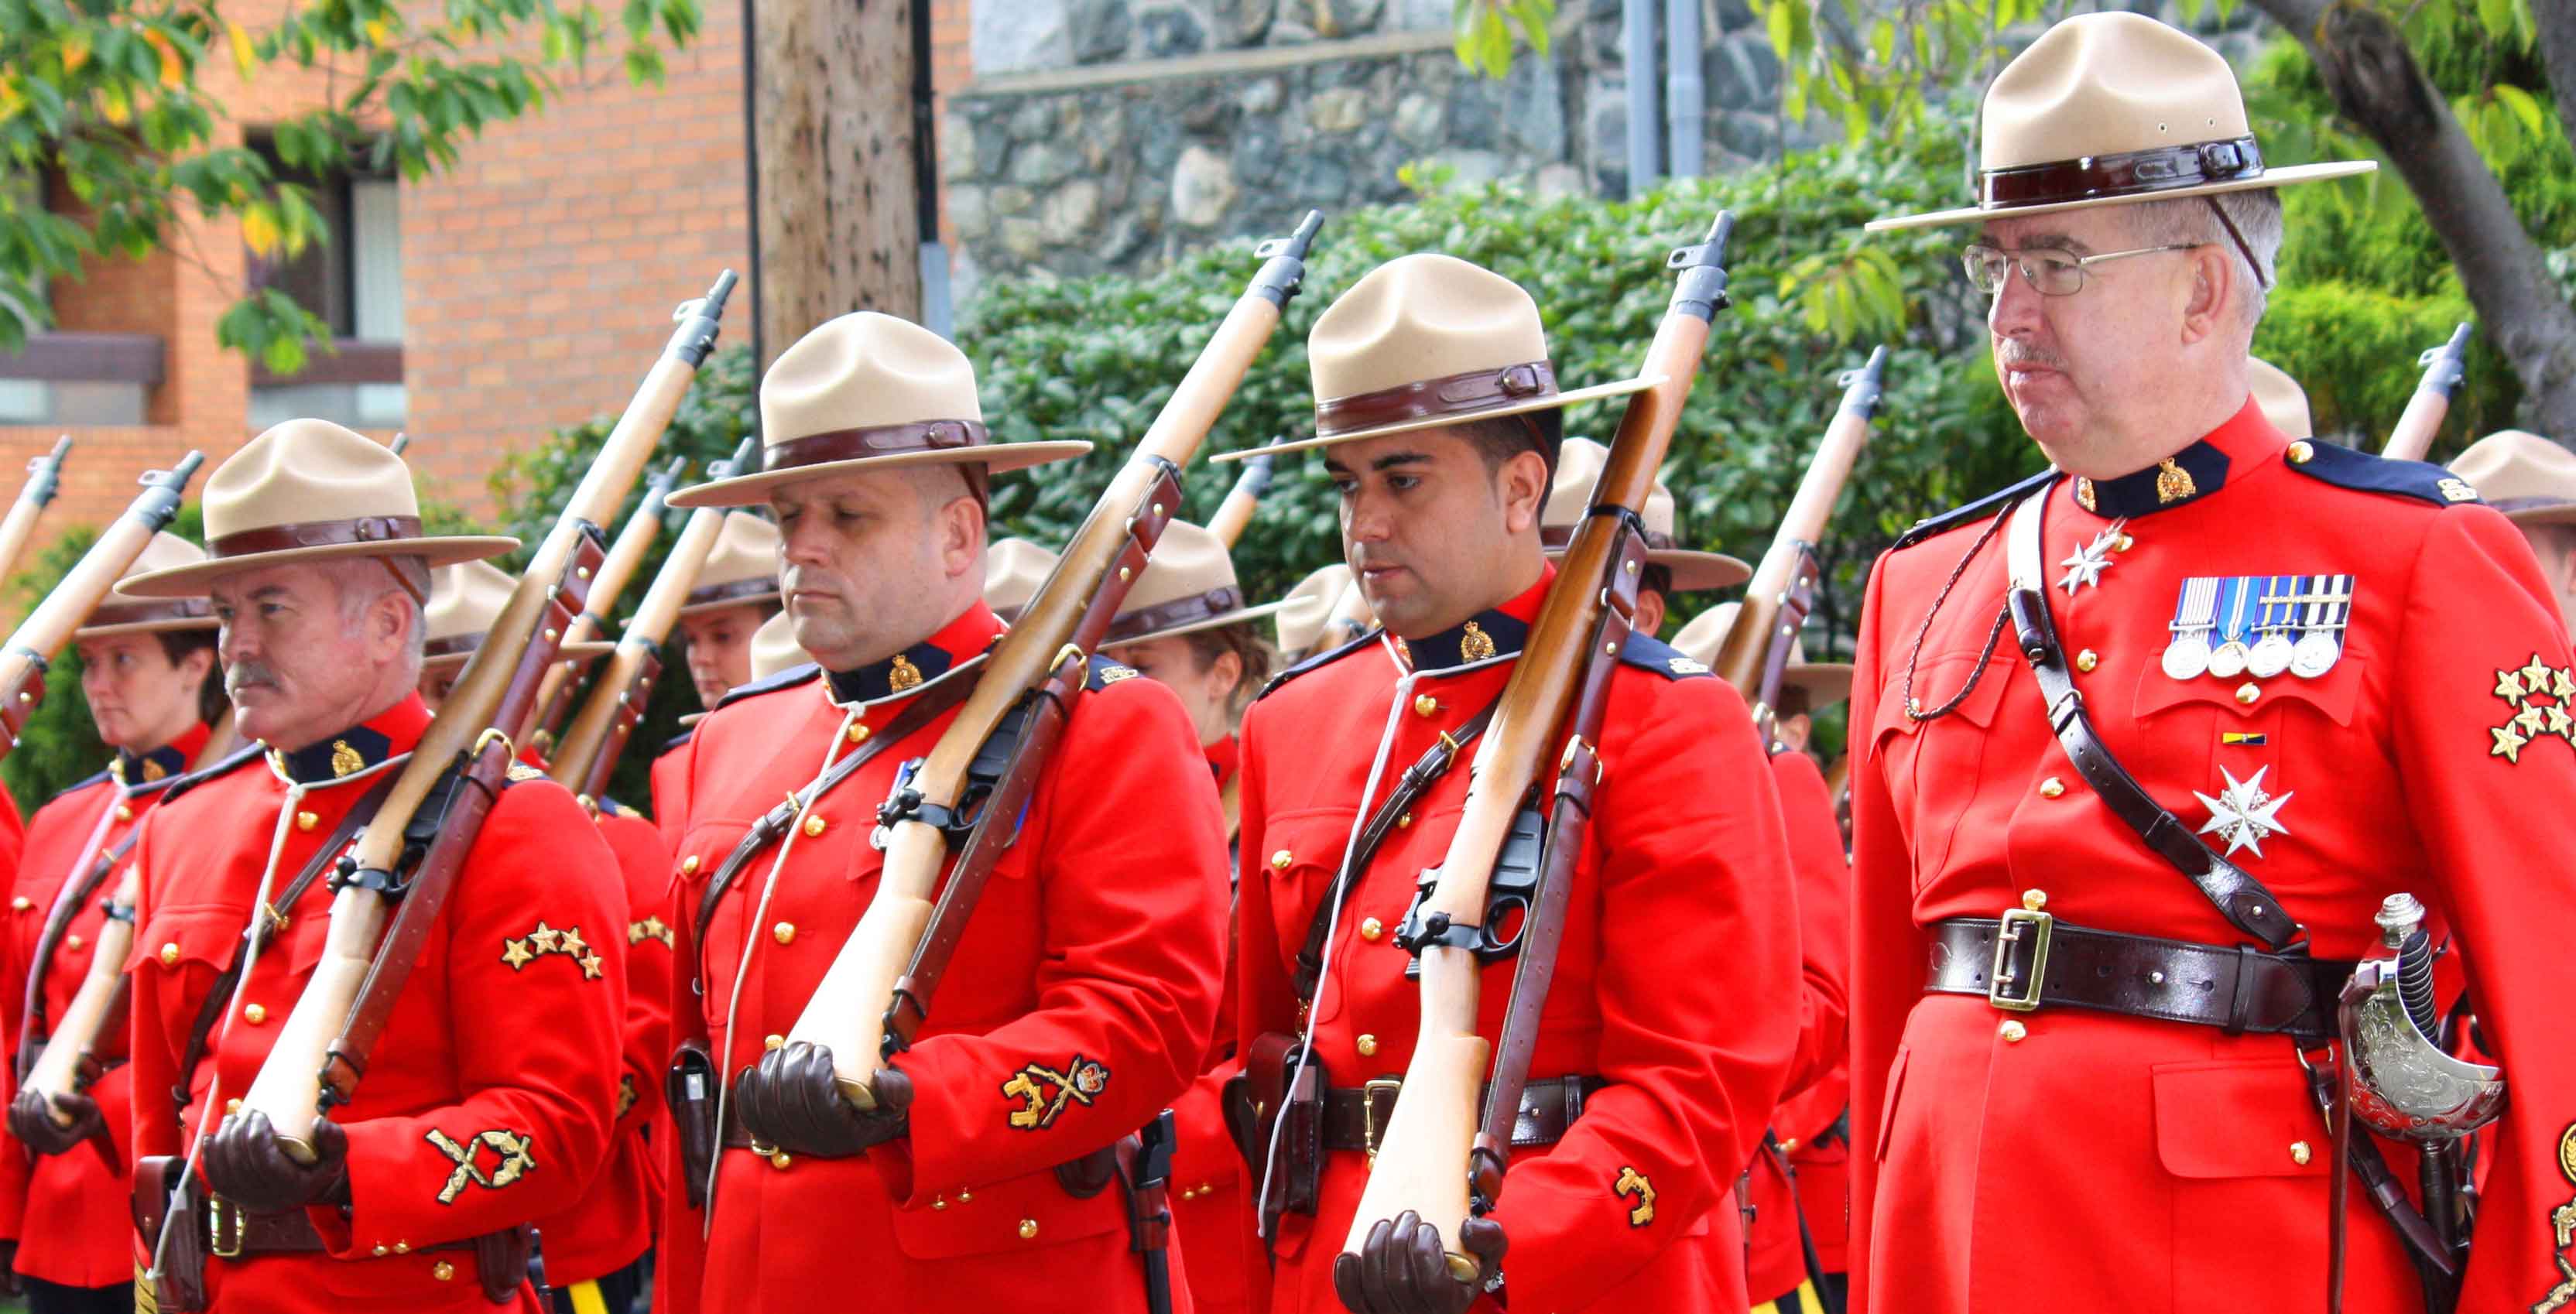 An image of uniformed RCMP officers